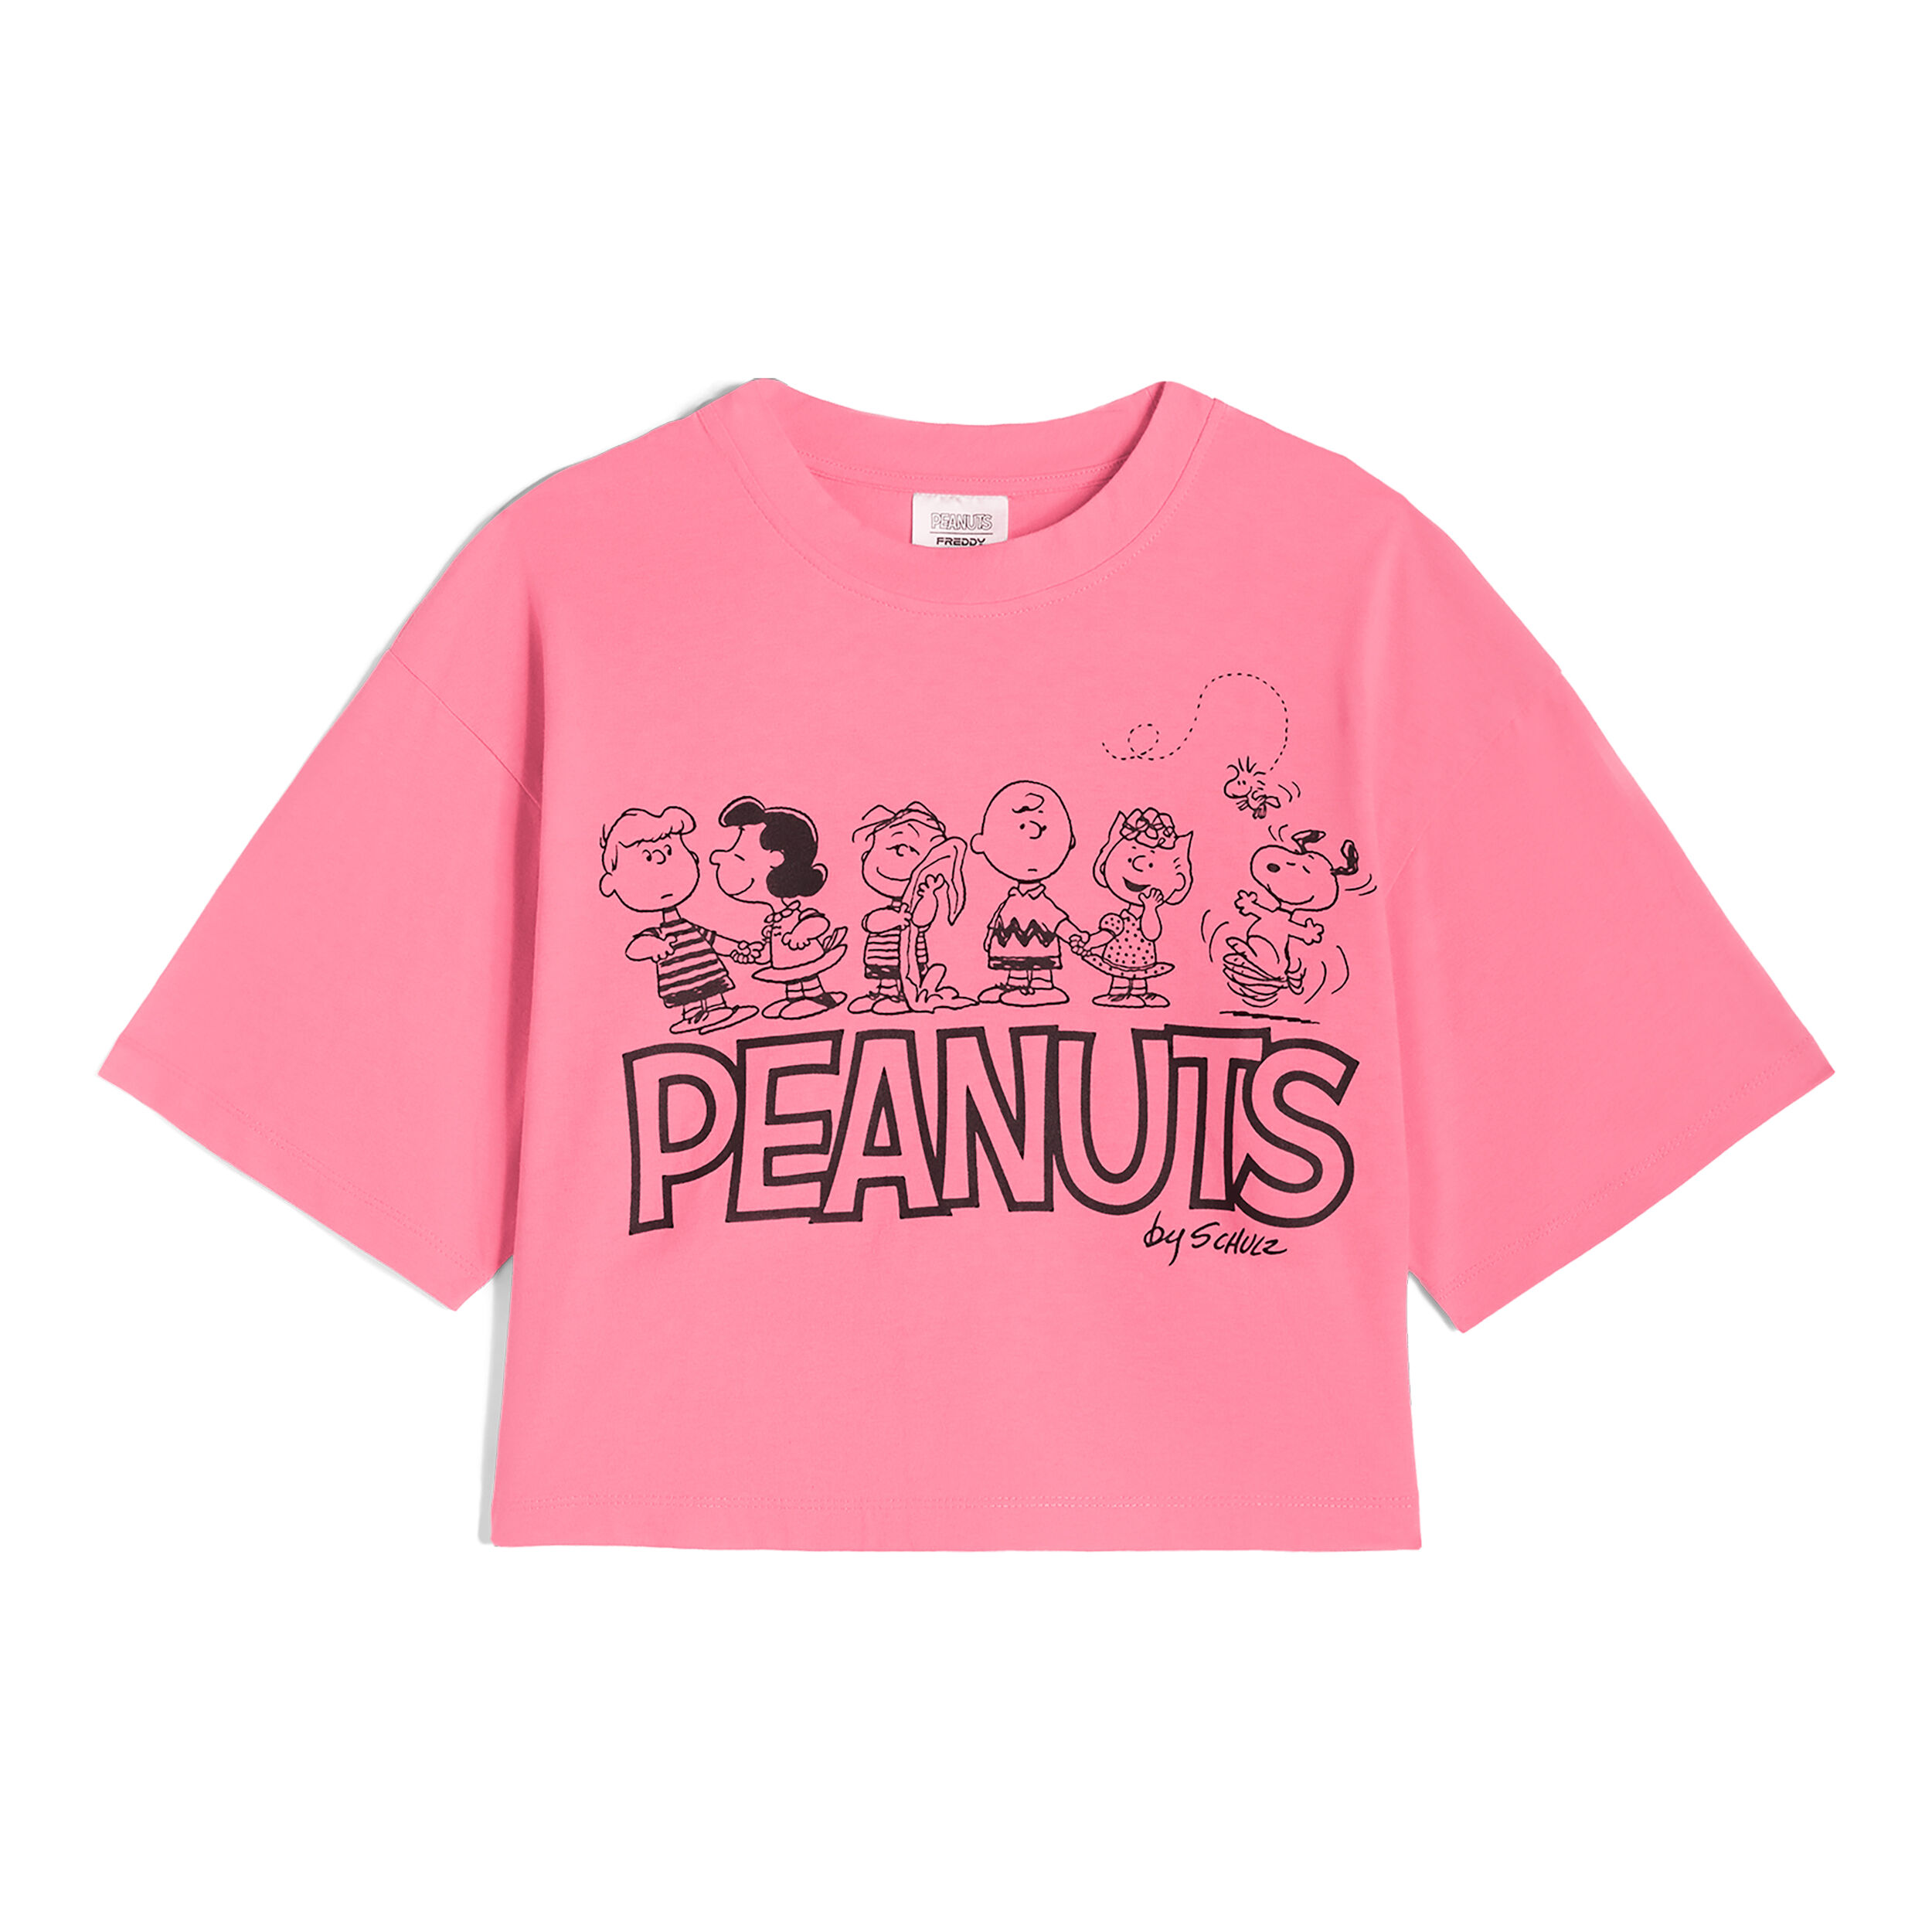 Freddy T-shirt donna corta in jersey con grafica Peanuts Pink Carnation Donna Extra Large